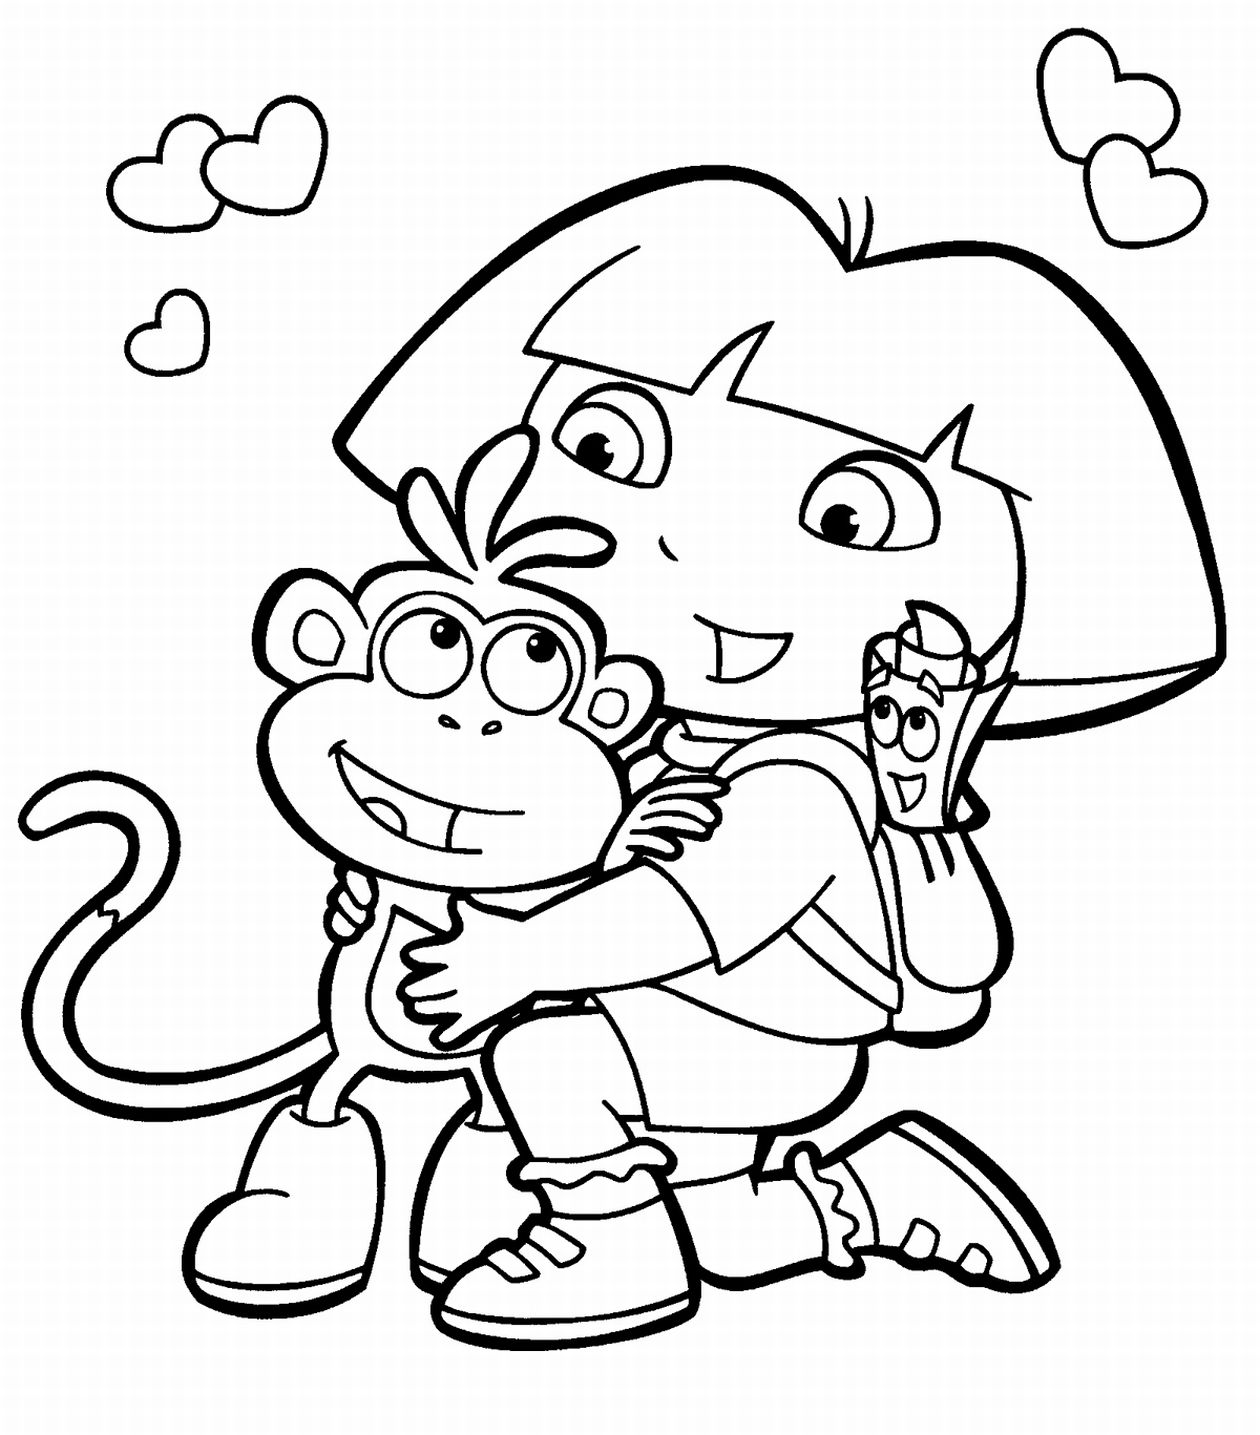 Dora coloring pages for kids - Coloring Pics